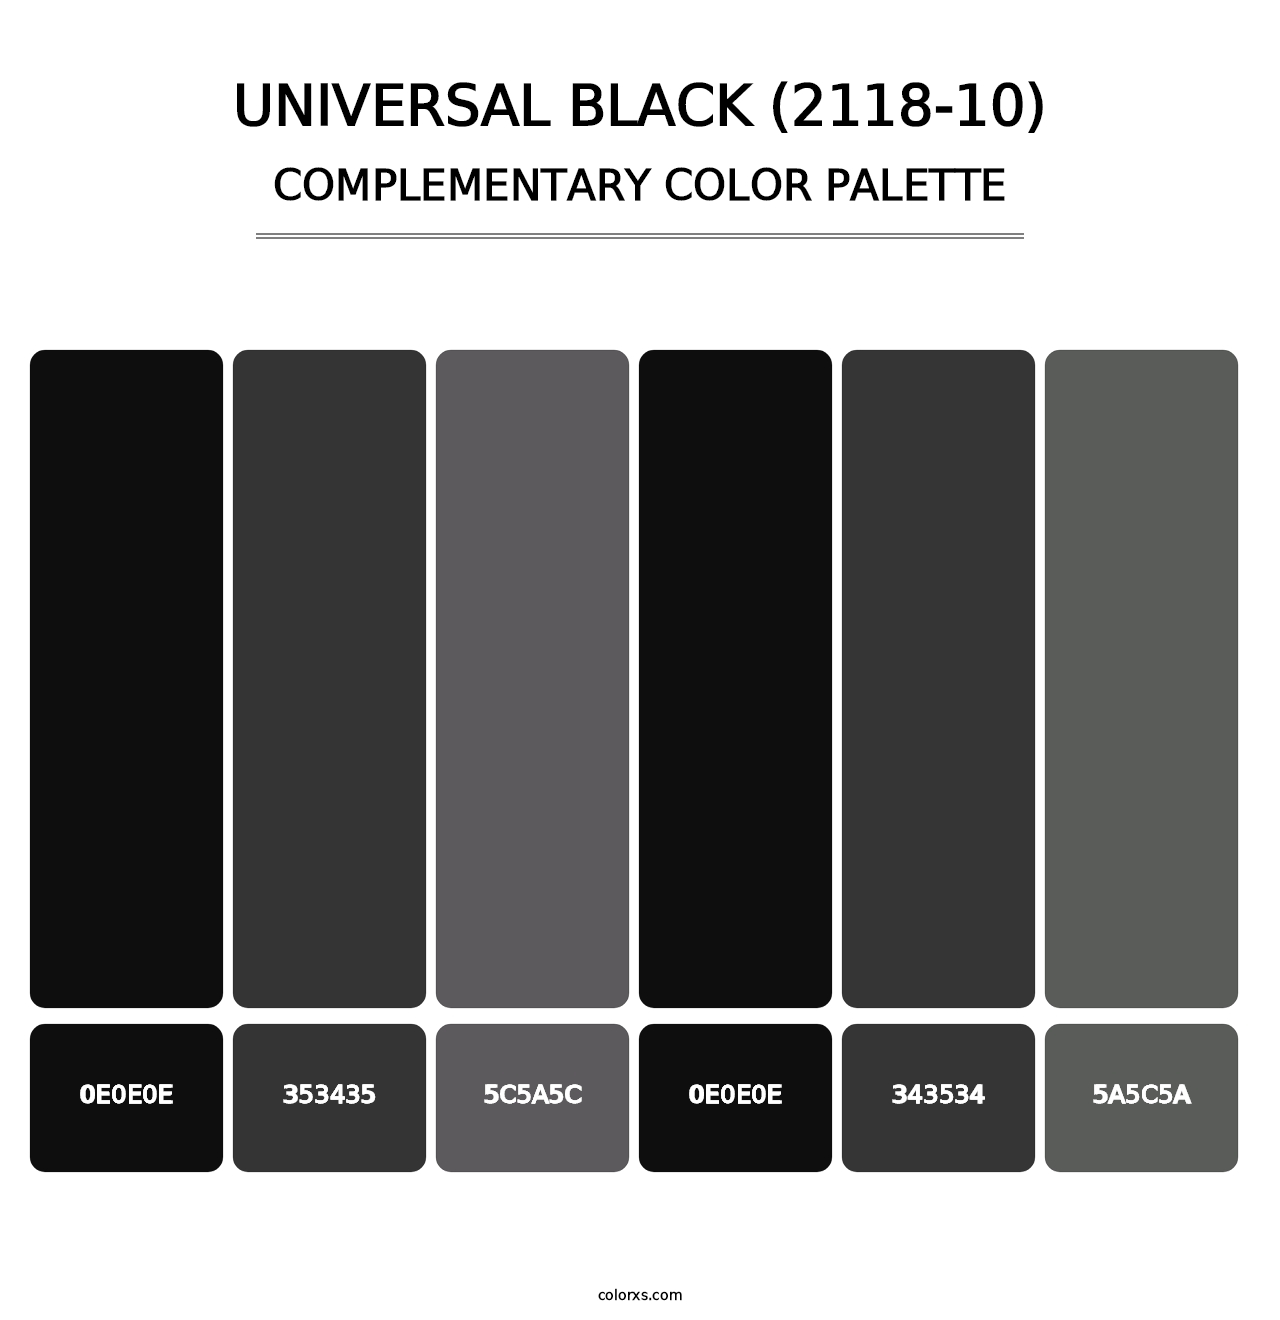 Universal Black (2118-10) - Complementary Color Palette